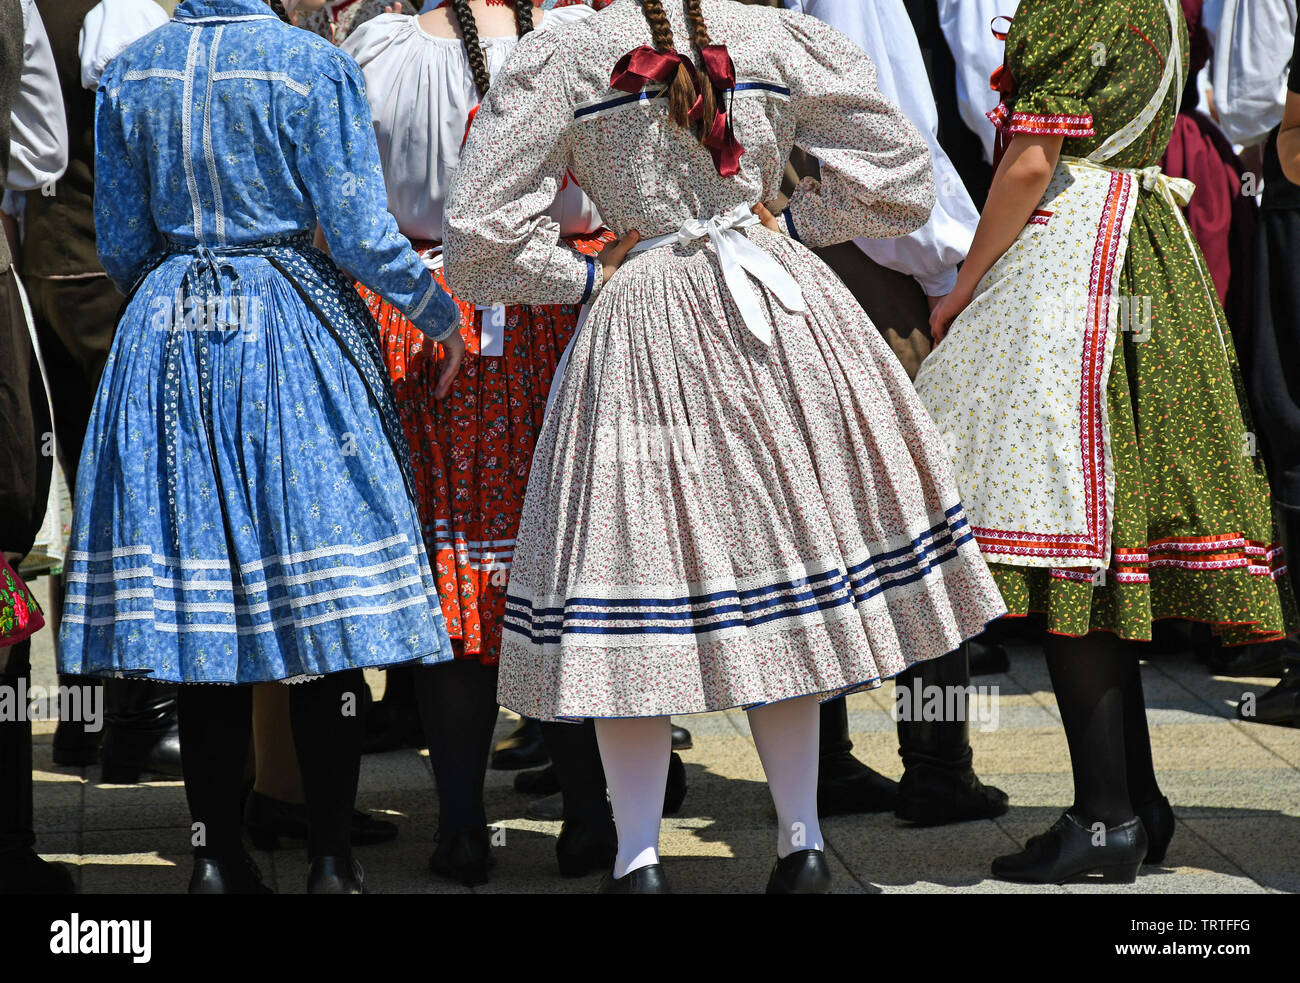 Folk dancers in traditional clothing Stock Photo